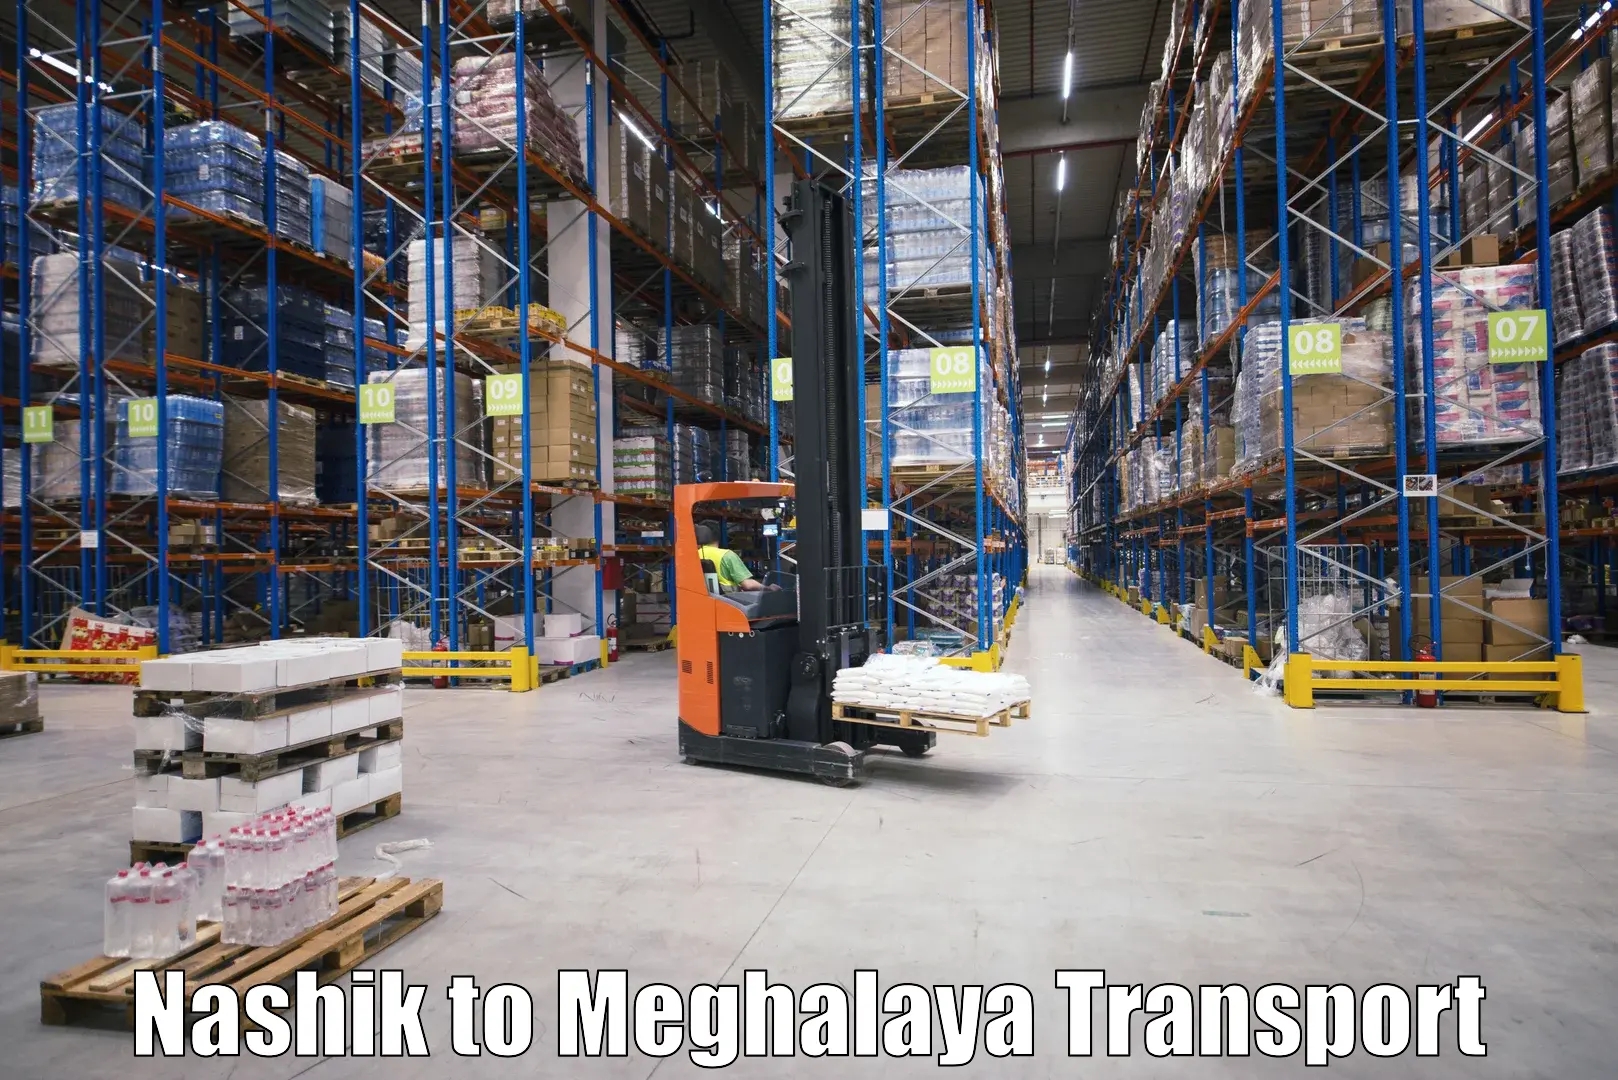 Truck transport companies in India in Nashik to Shillong